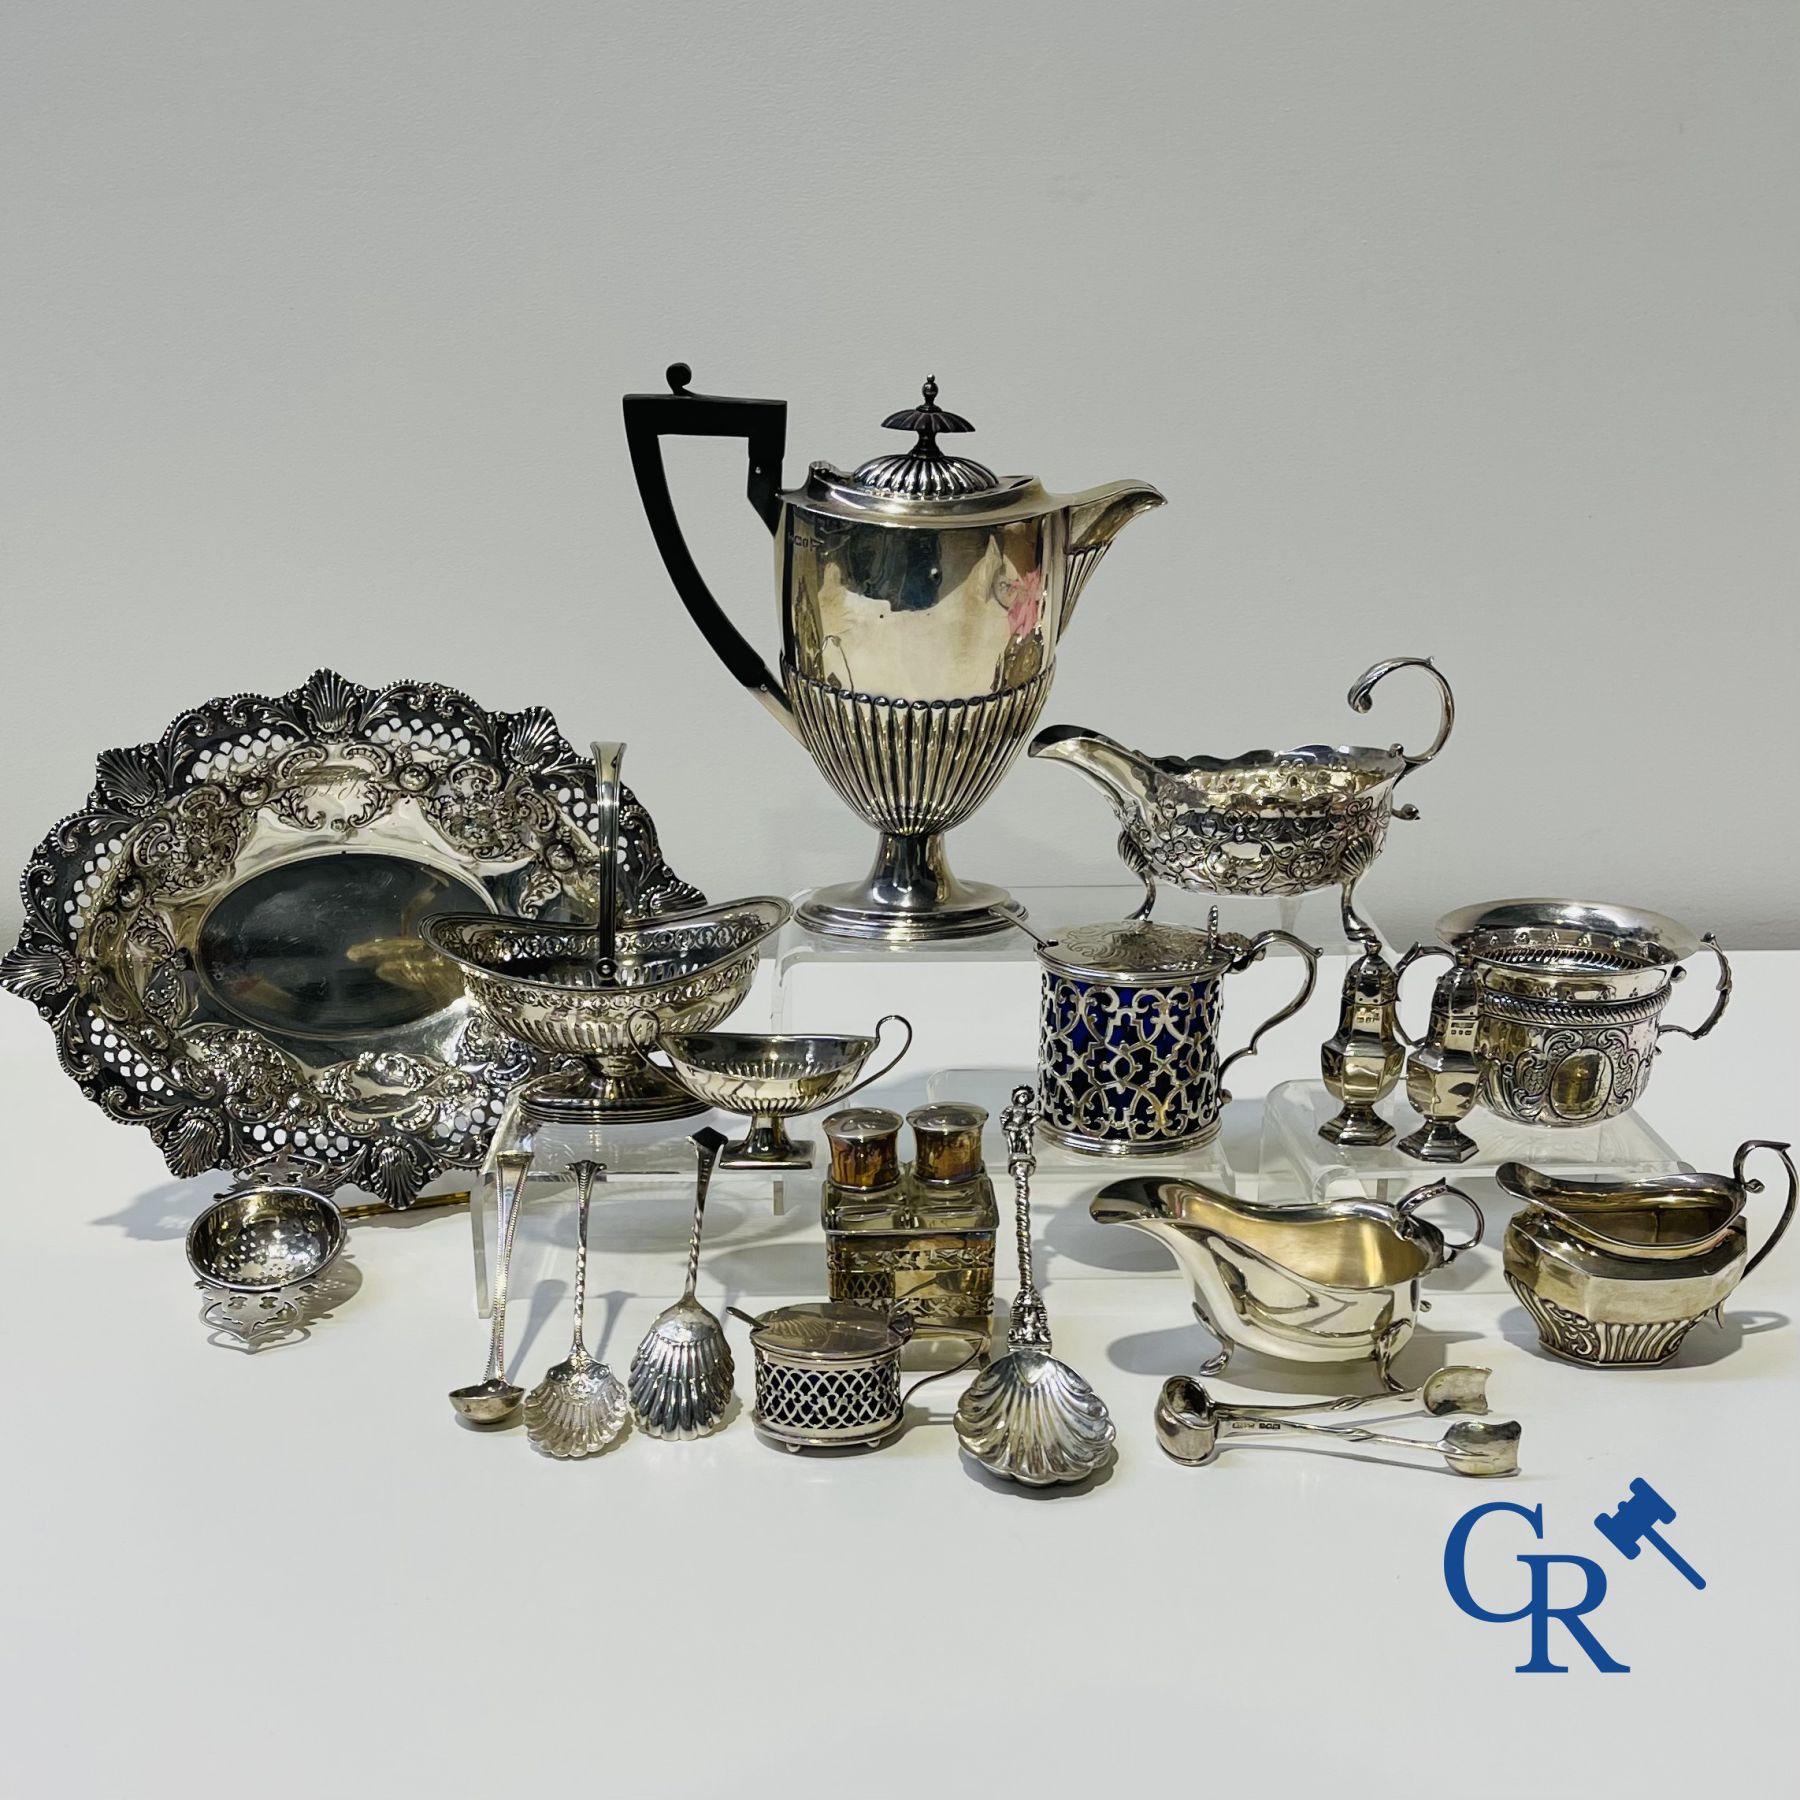 Silver: Important lot with various pieces of English silver. (various hallmarks) 19th-20th century.